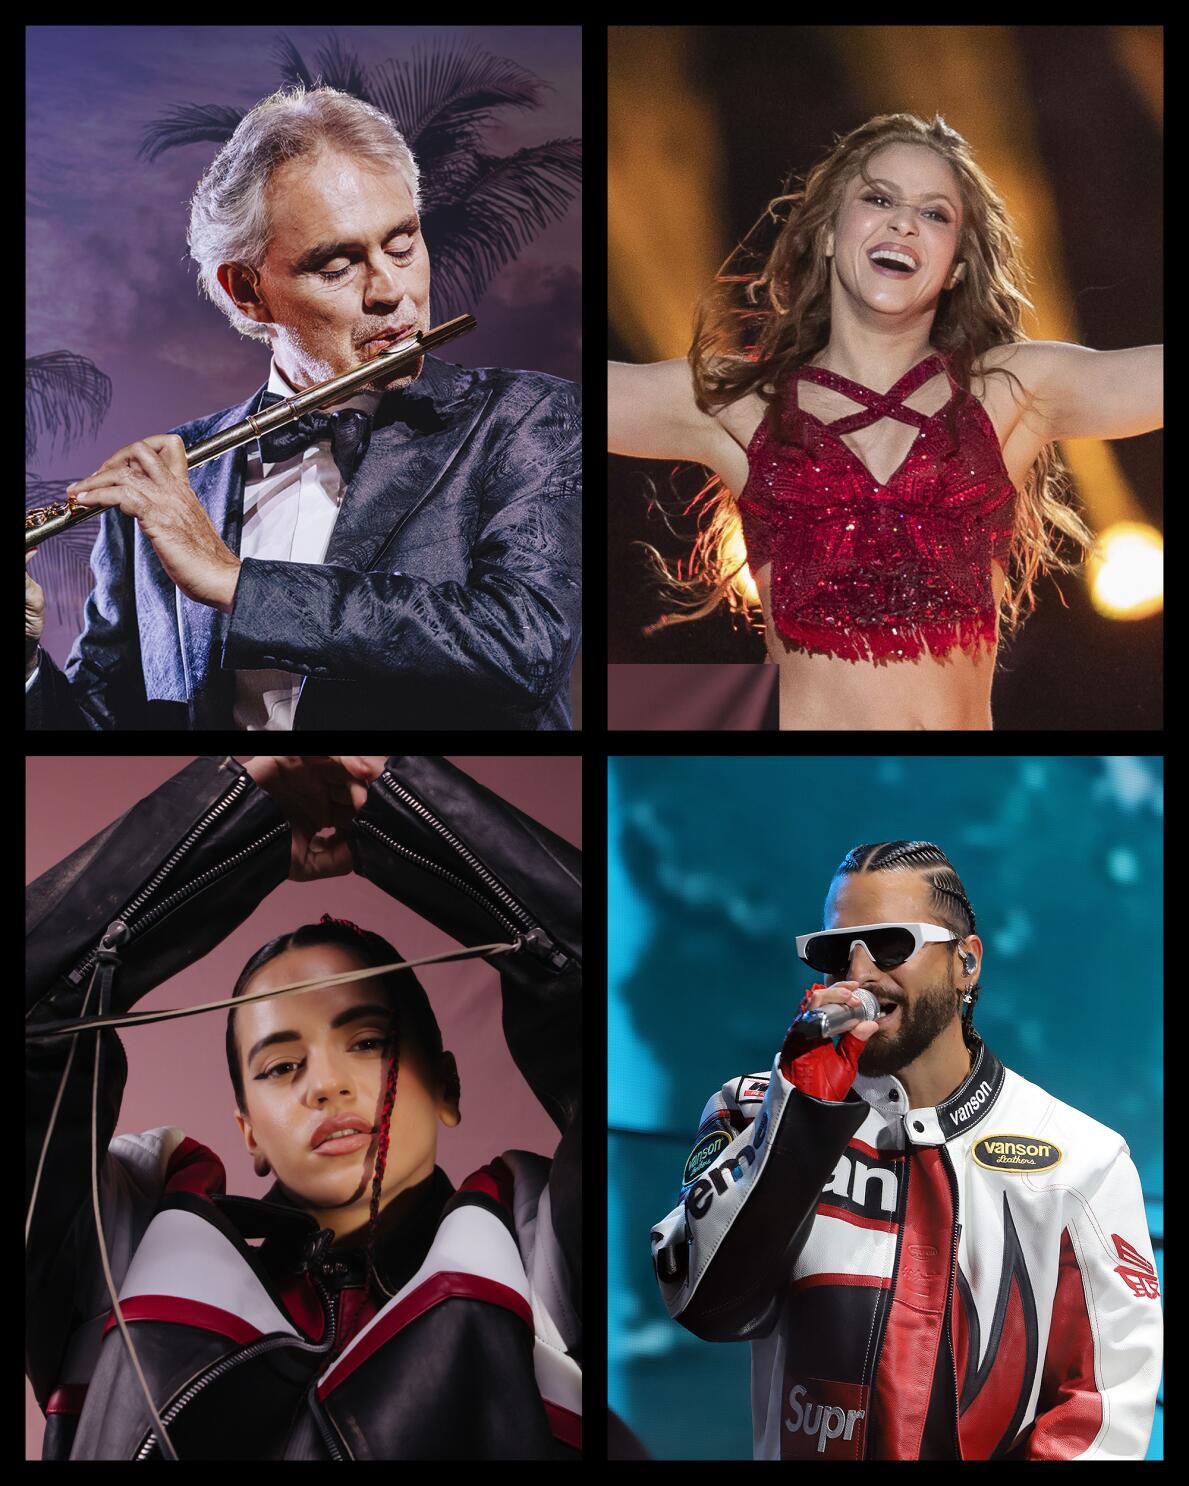 The Latin Recording Academy® announces 24th Annual Latin GRAMMY Awards®  nominees